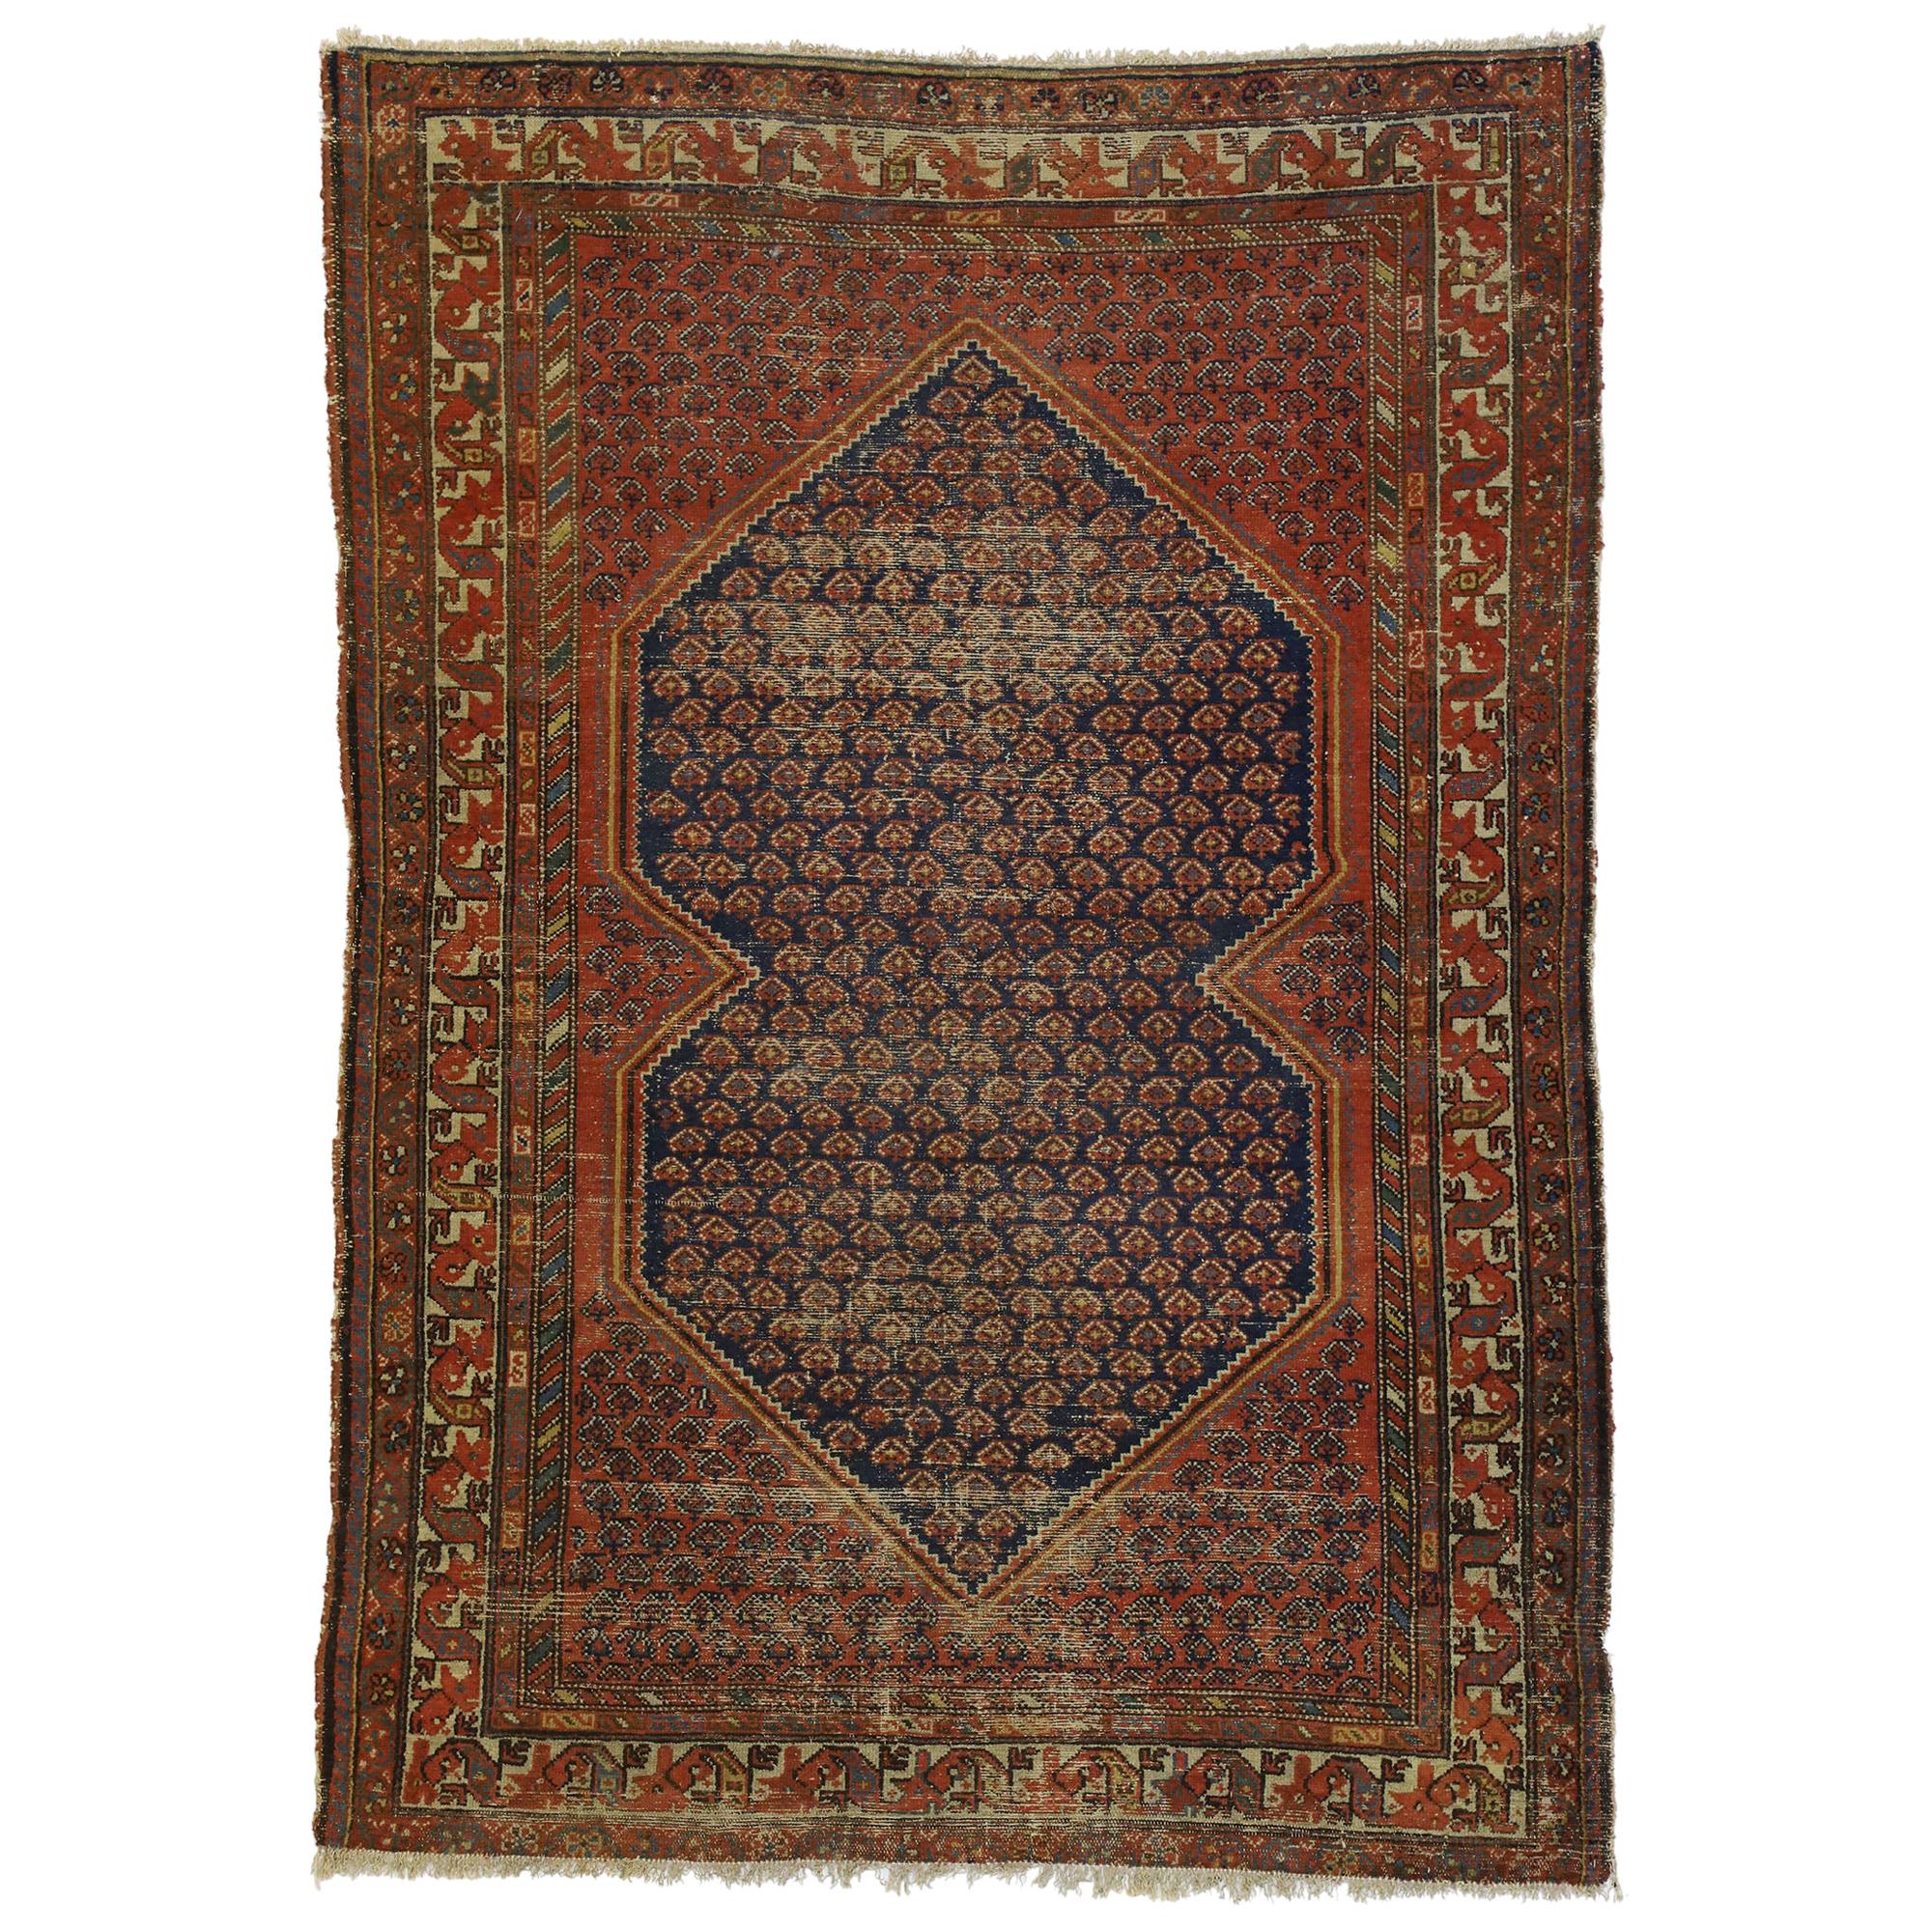 Distressed Antique Persian Malayer Rug with Rustic Artisan and Industrial Style